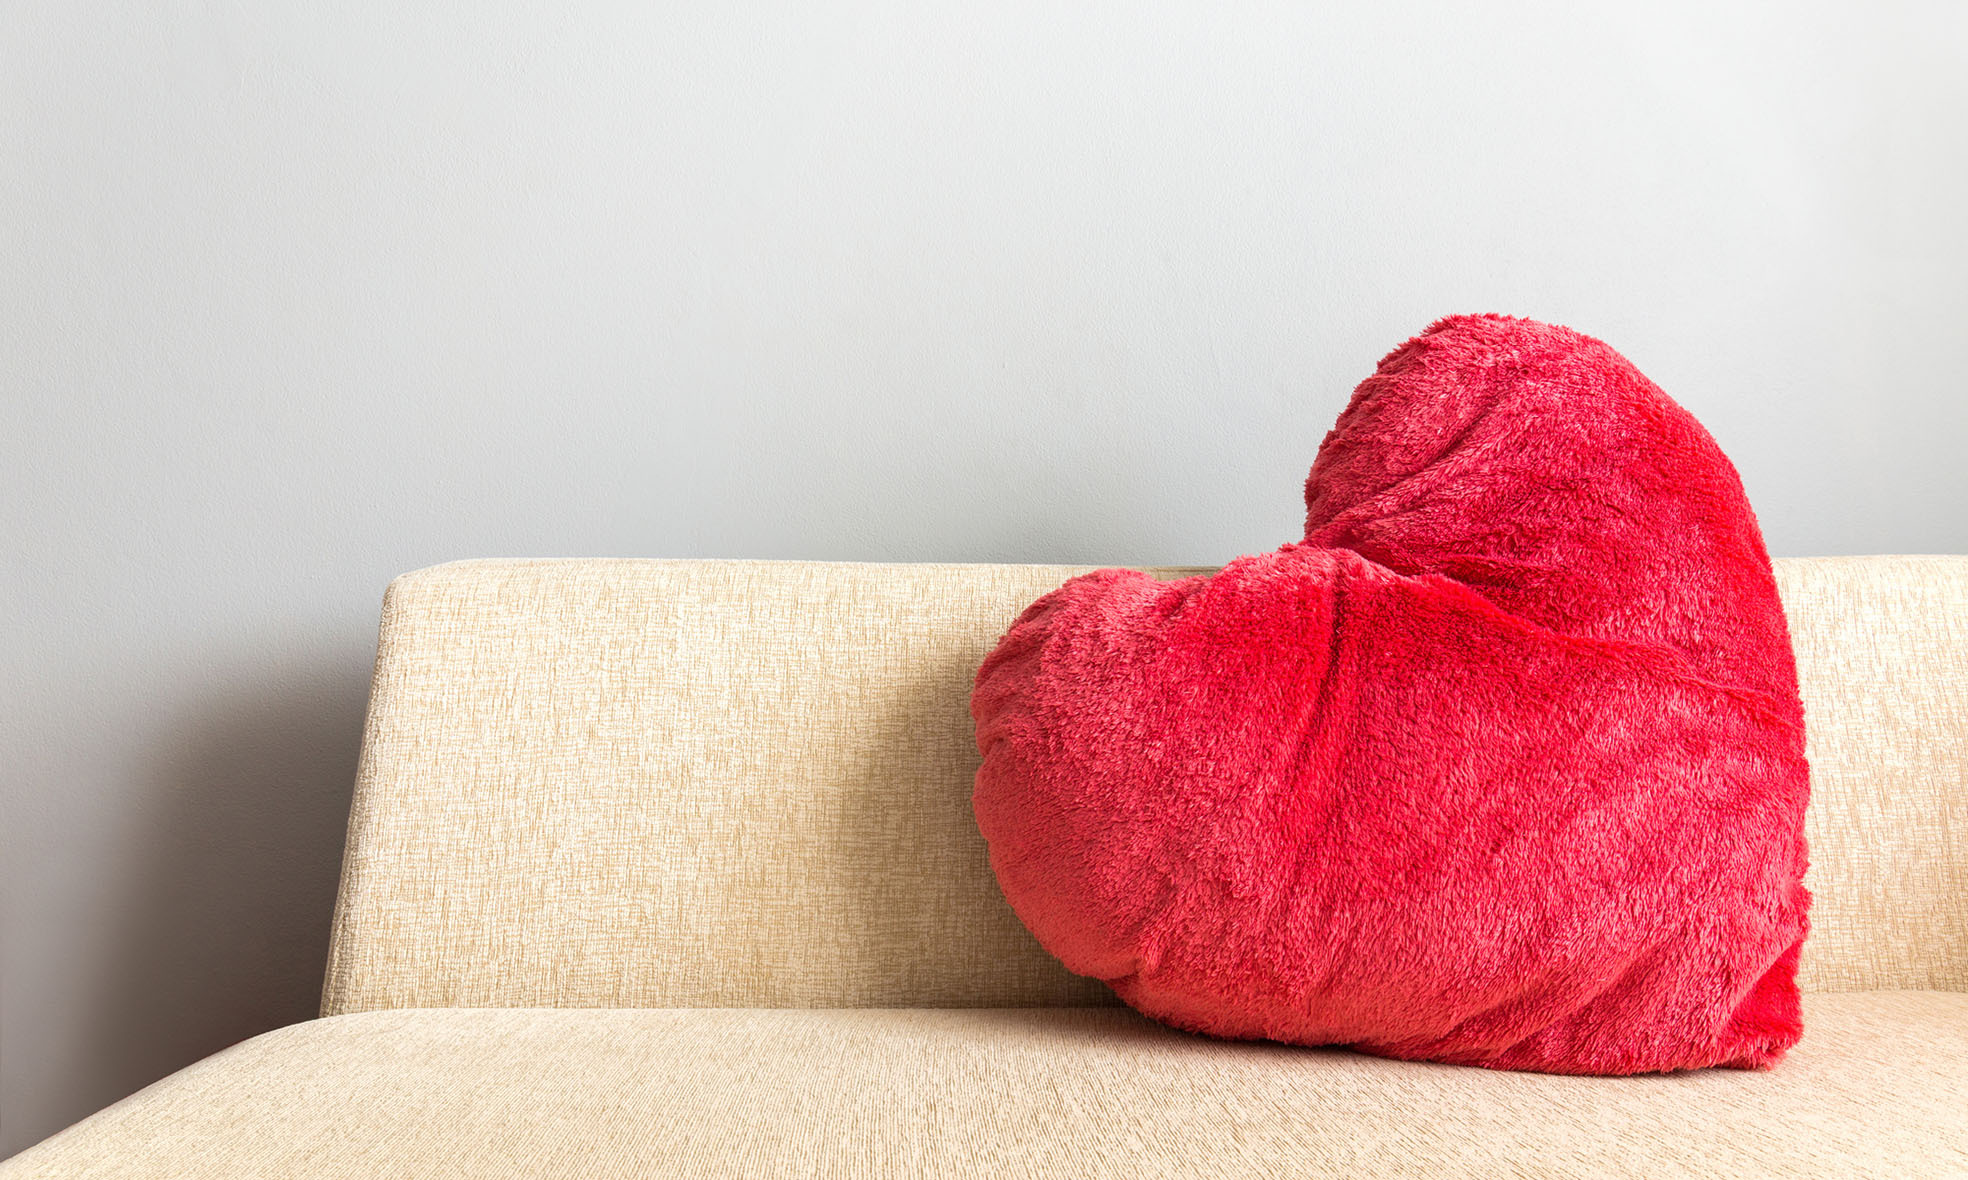 A heart surgery pillow could help you during your recovery. When hugged tightly, the added pressure can prevent any jolting caused when your sneeze or cough.